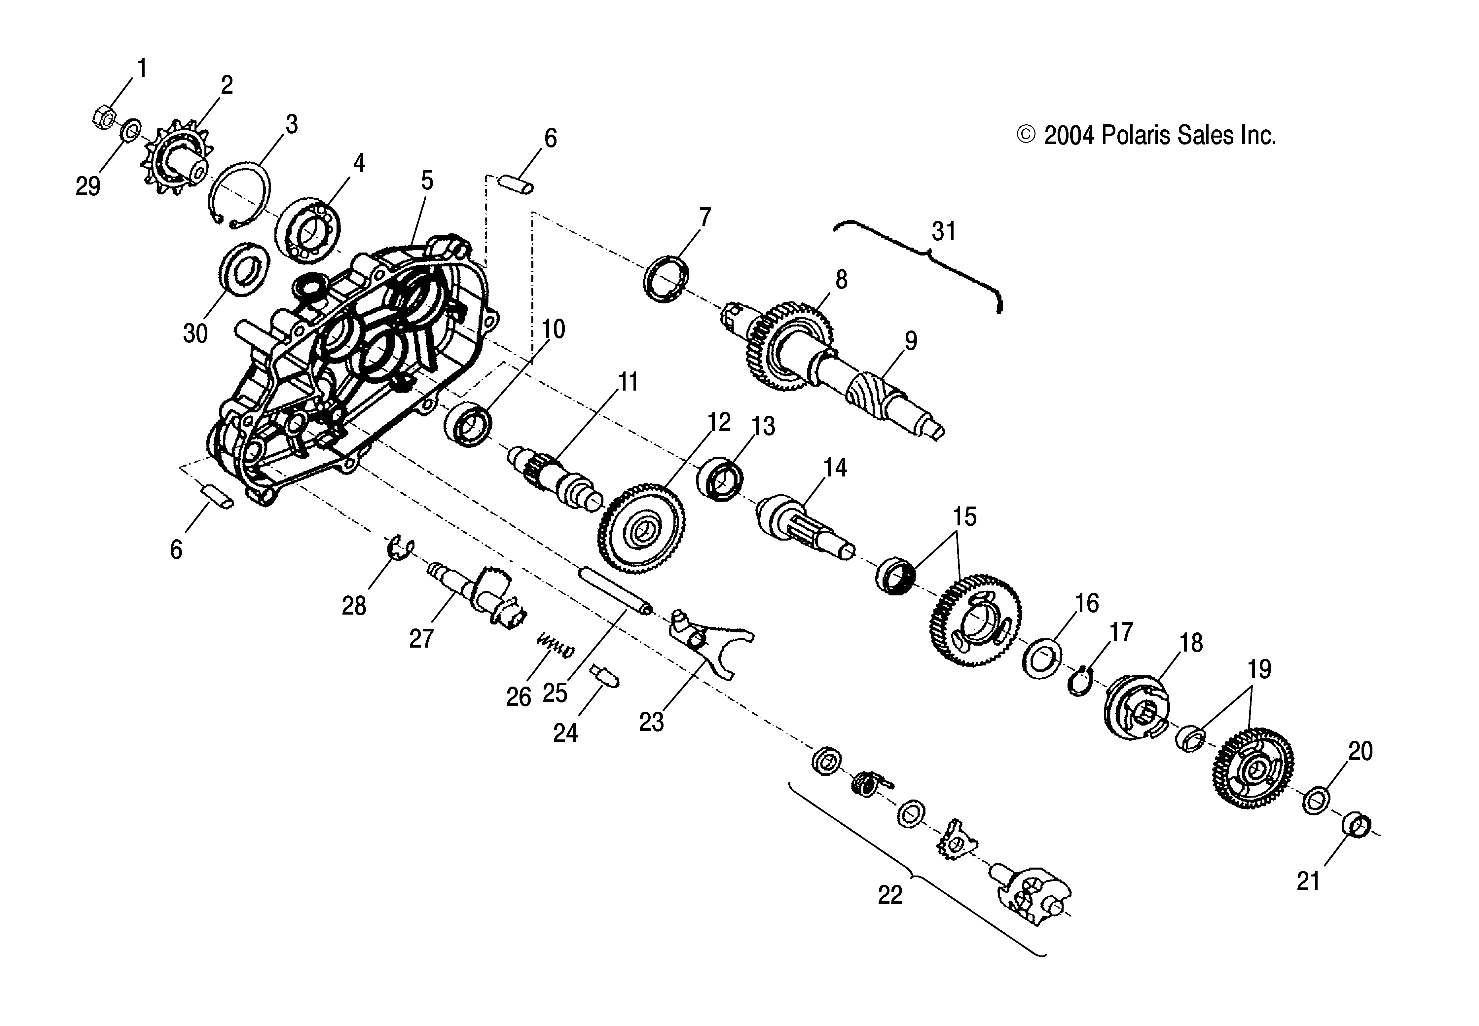 Part Number : 0452148 WASHER-FLAT